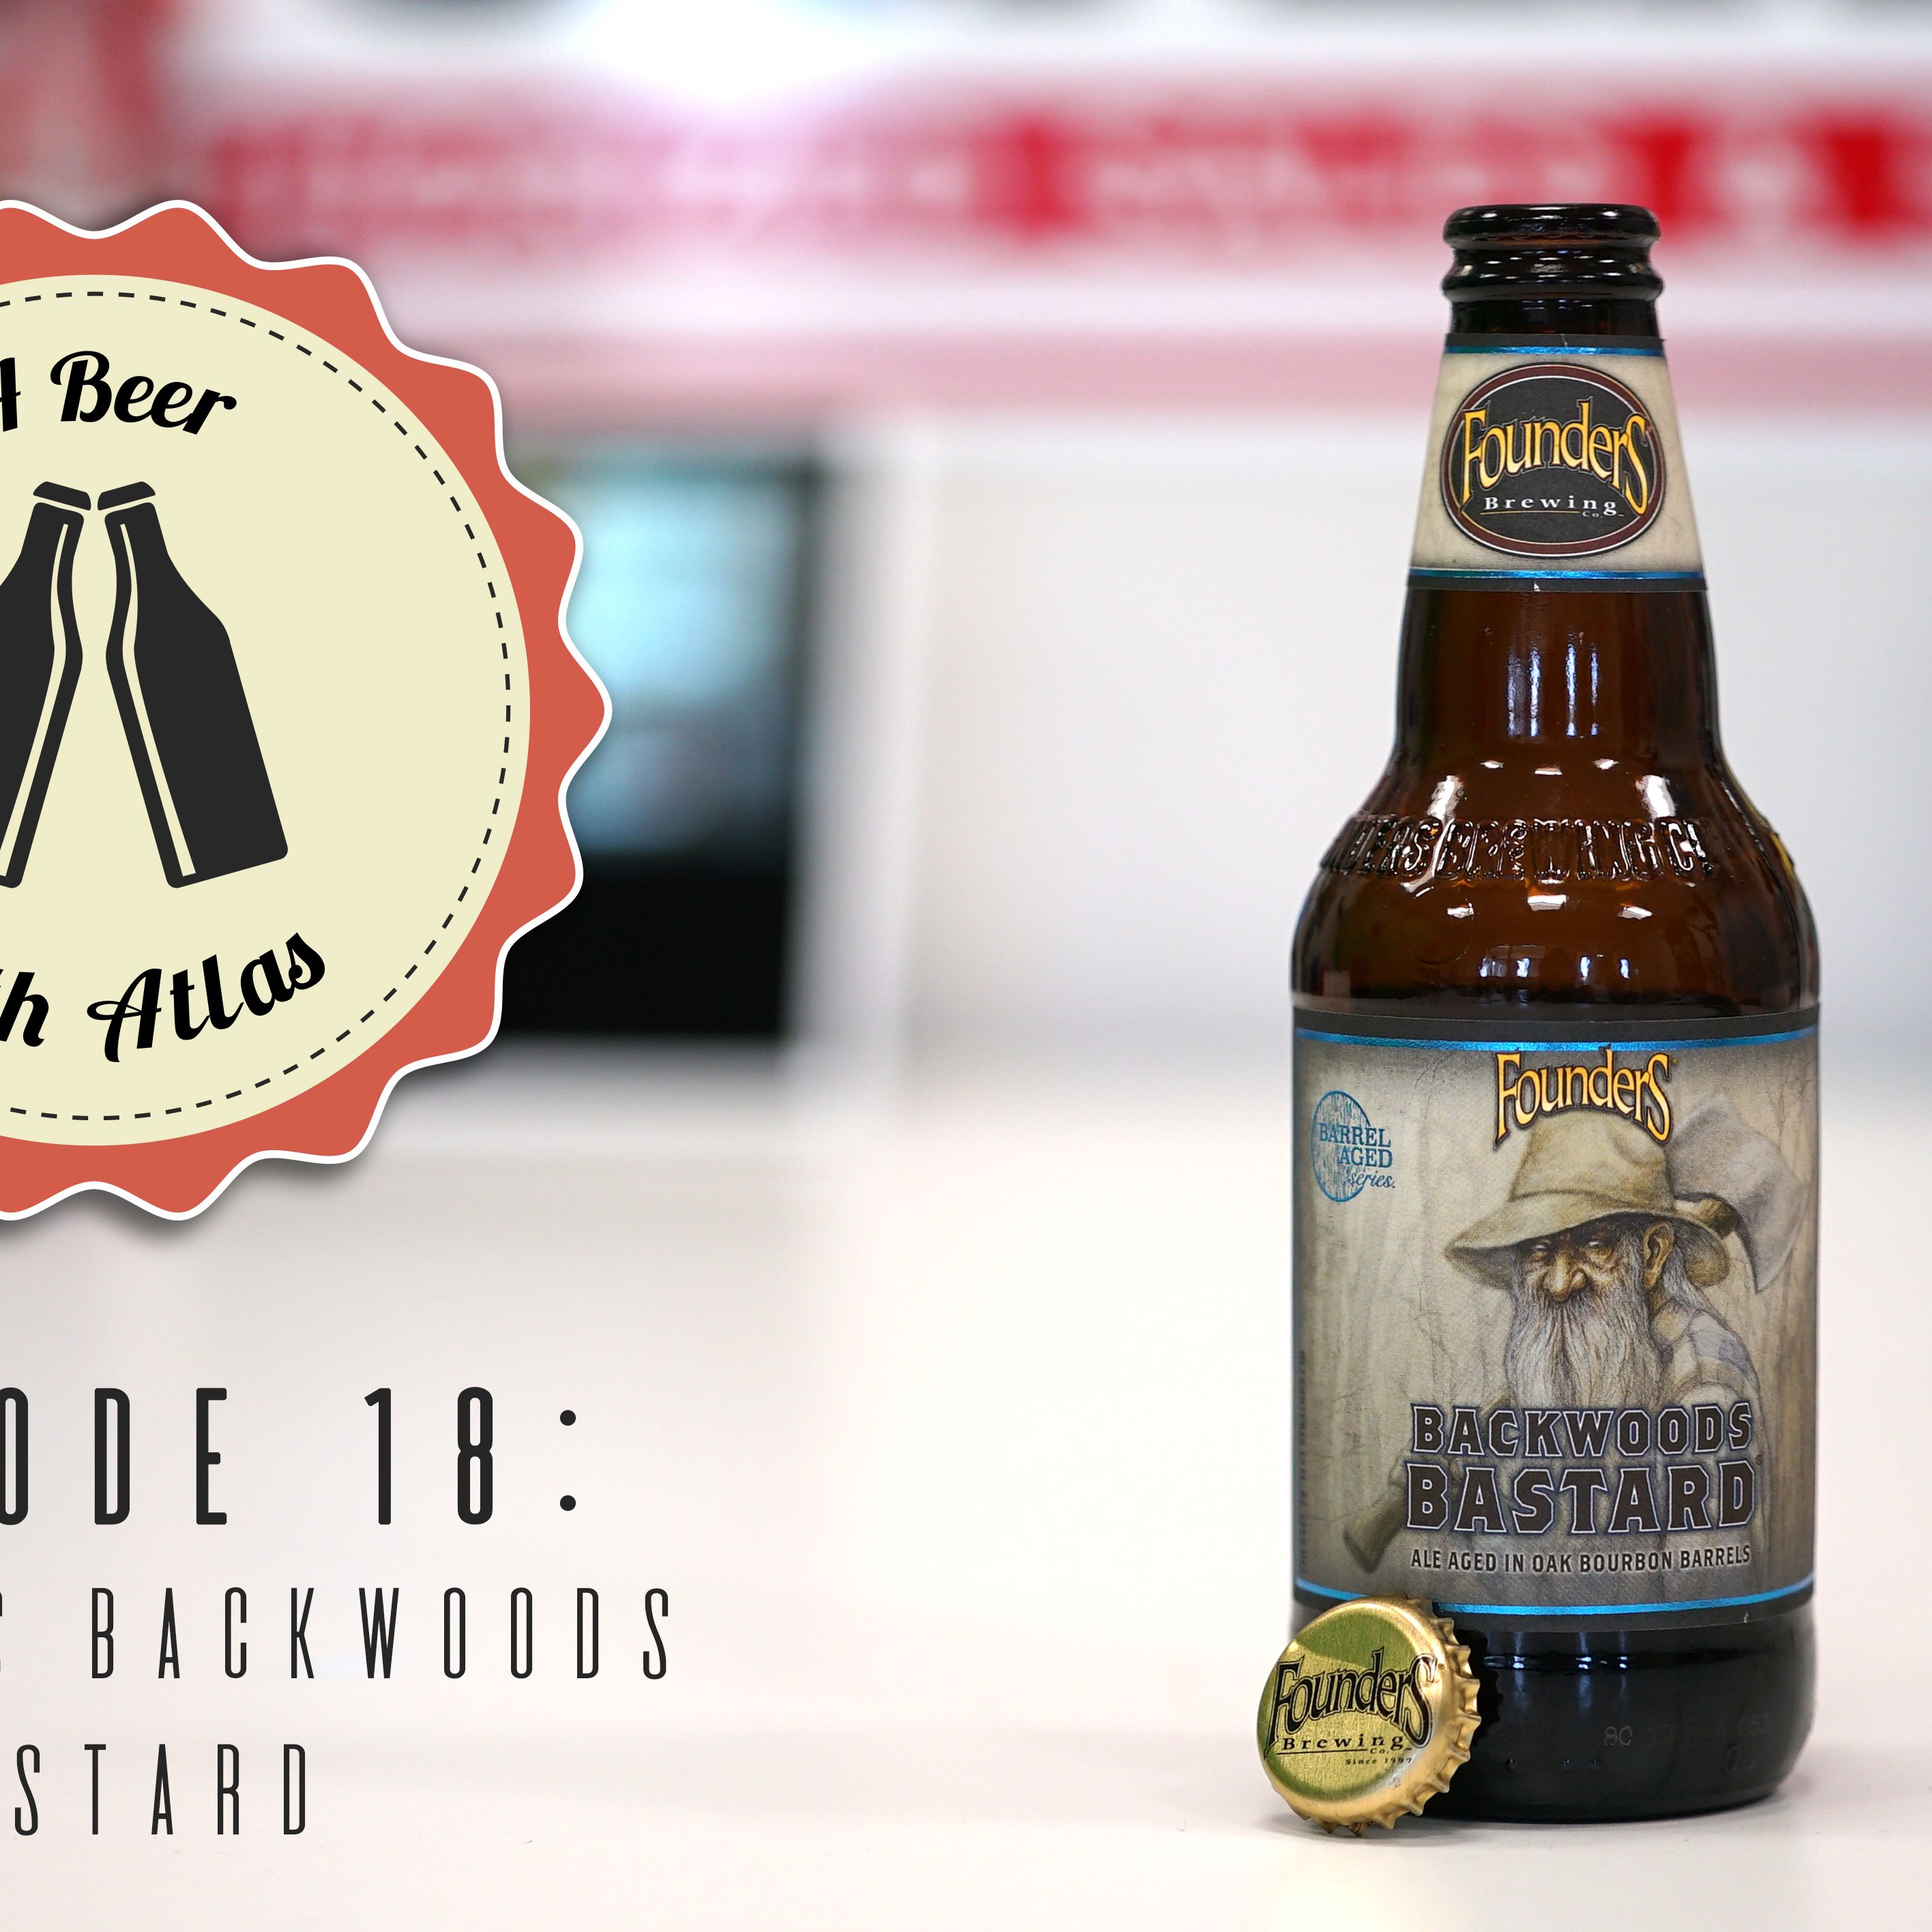 A Beer With Atlas #18 - Founders Backwoods Bastard